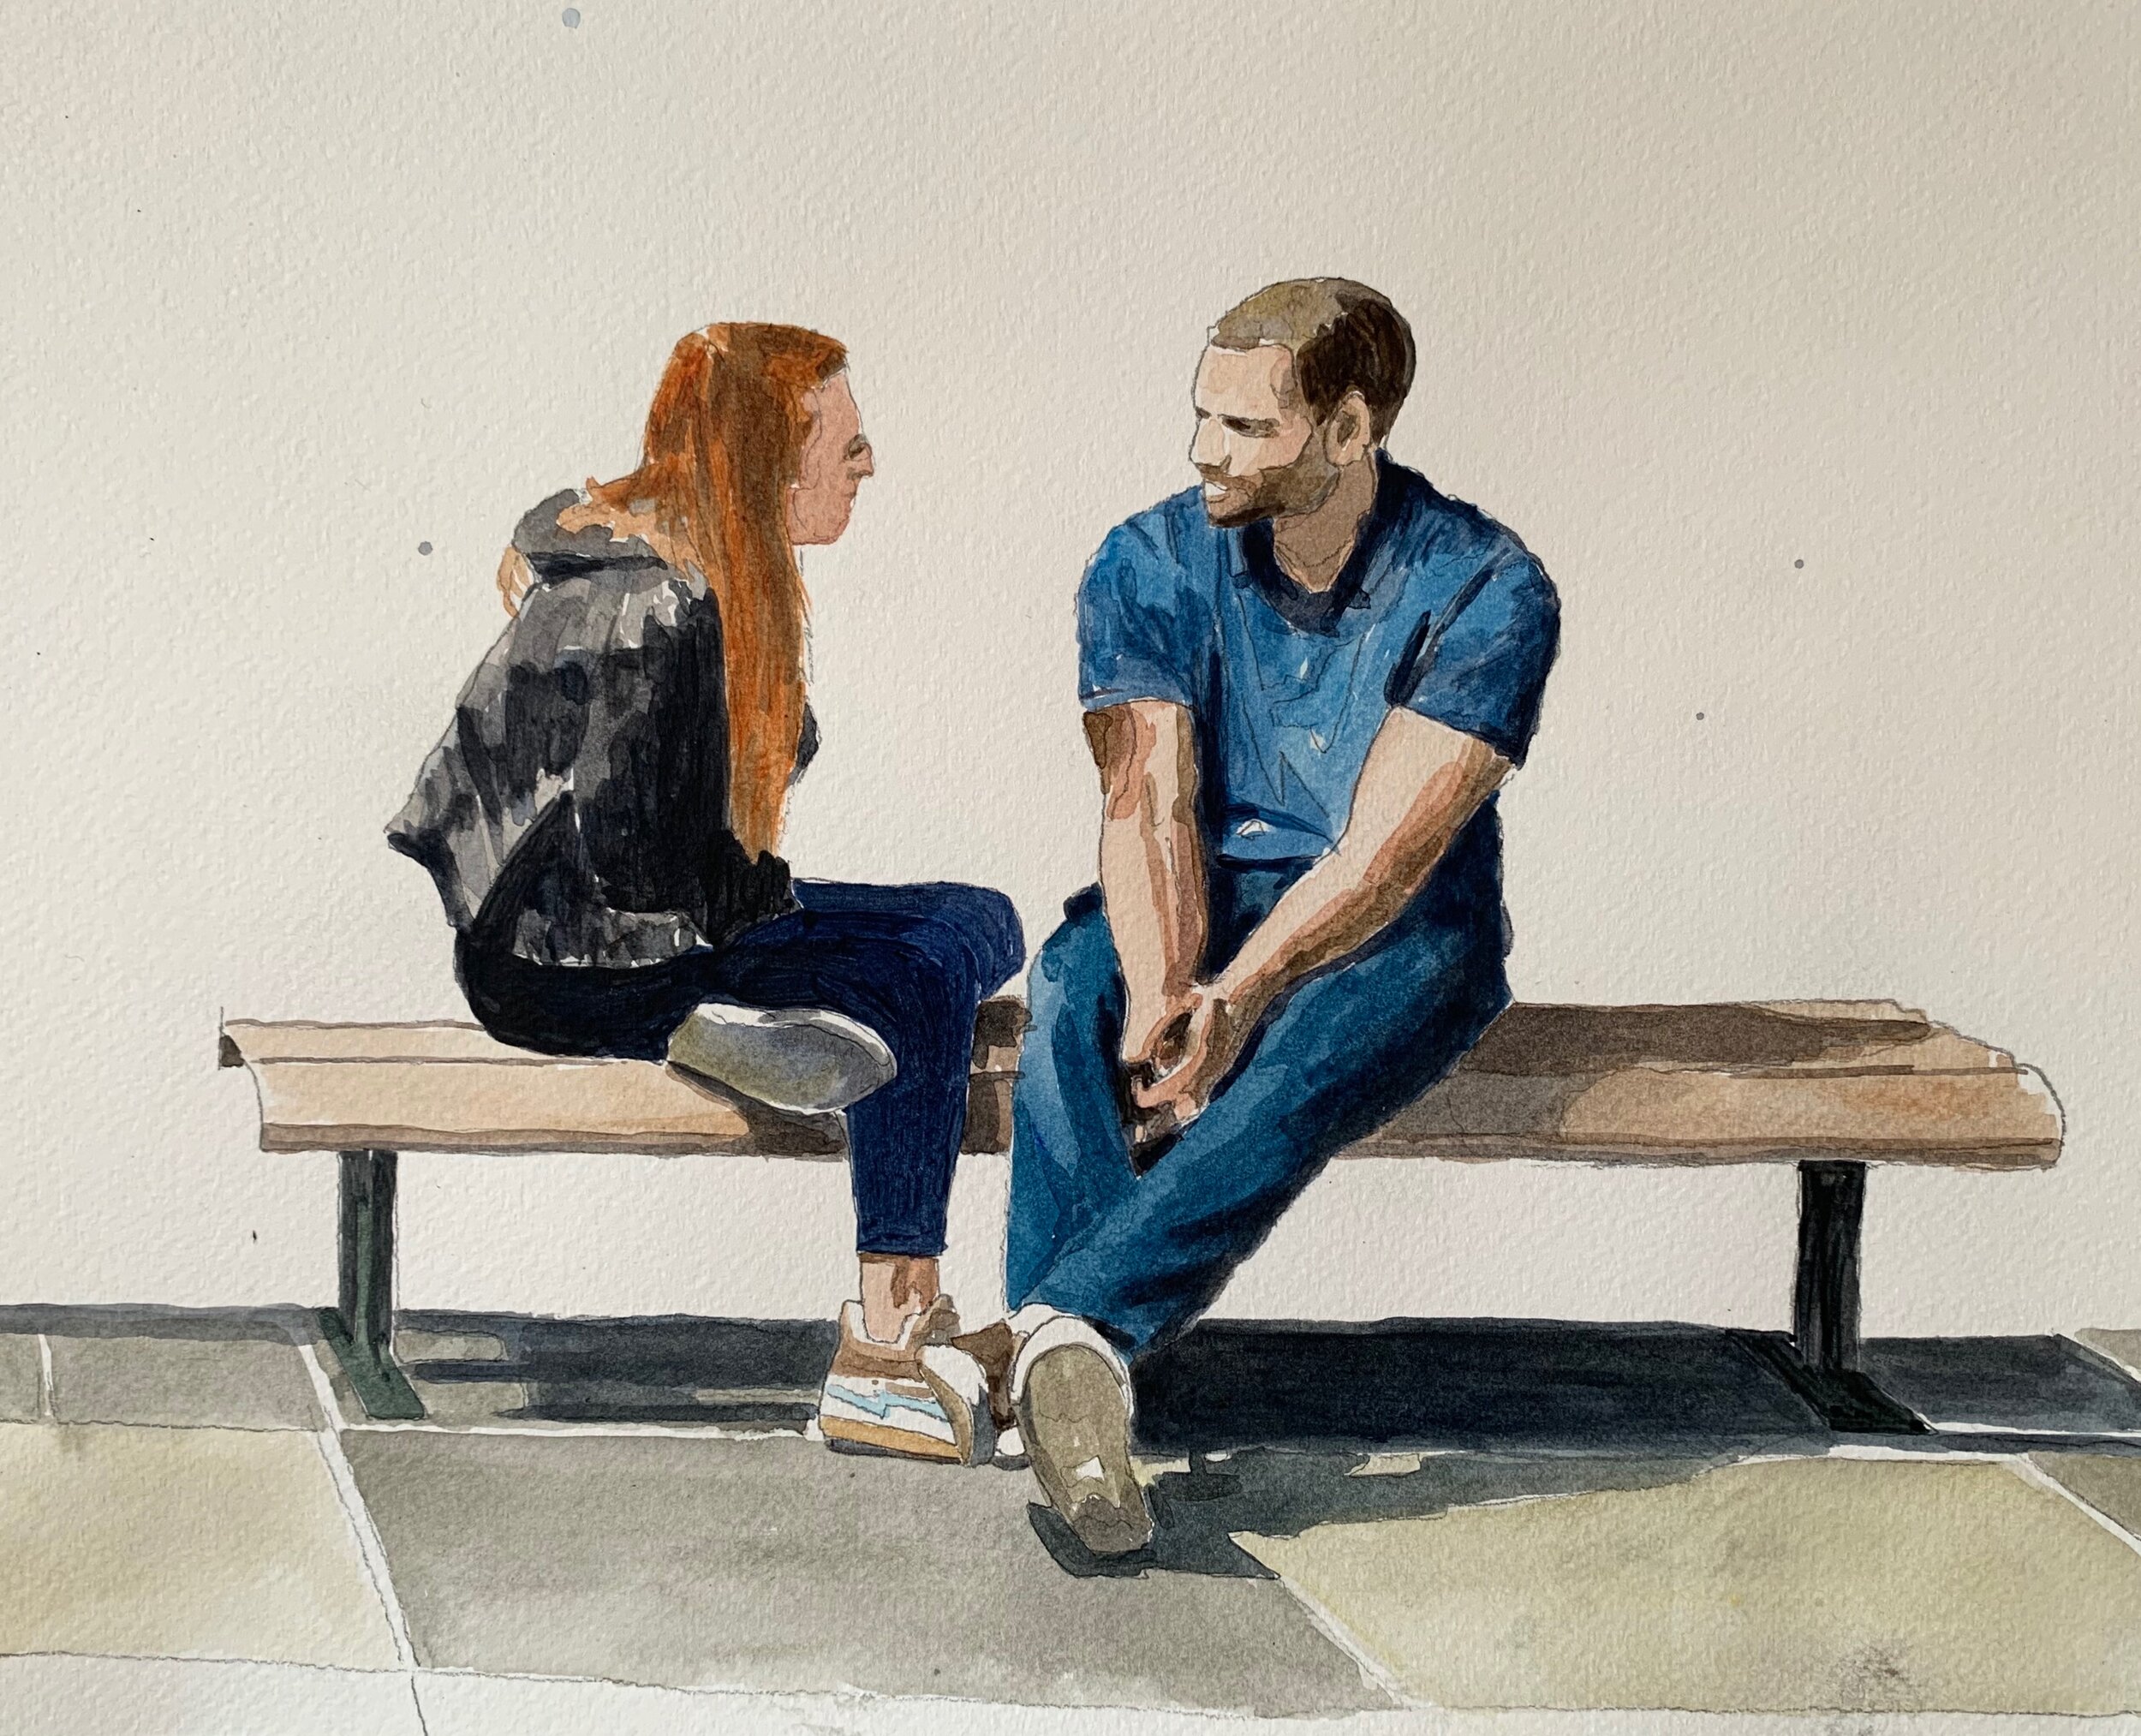 Untitled, Couple on Bench, 2020